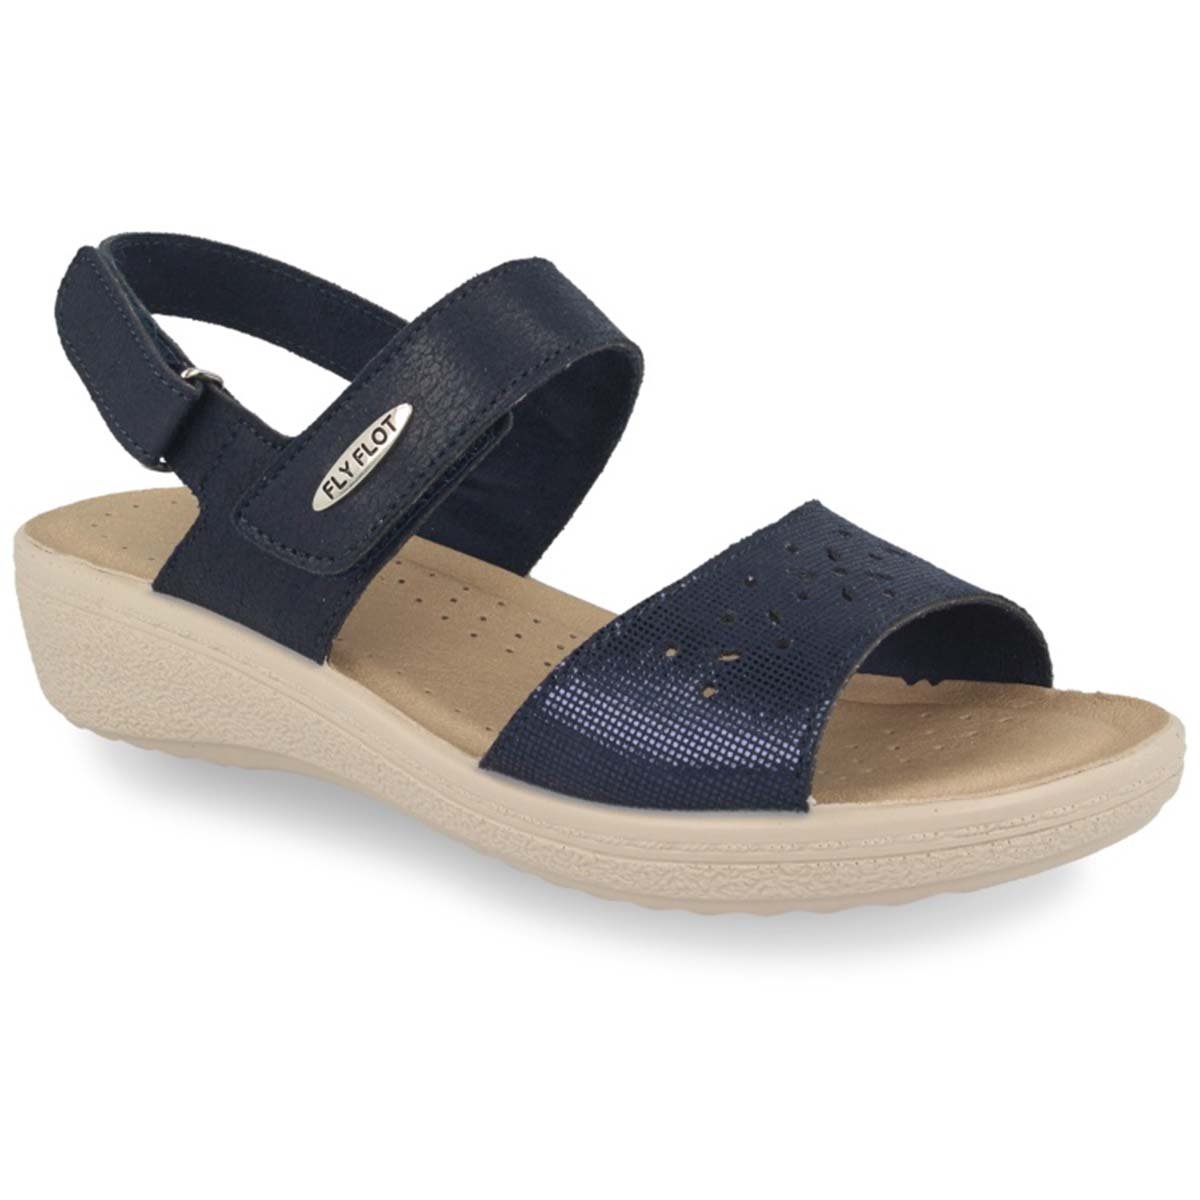 See the Blue Soft Microfiber Back Strap Women Sandals With Anti-Shock Cushioned Leather Insole in the colour BLUE, available in various sizes